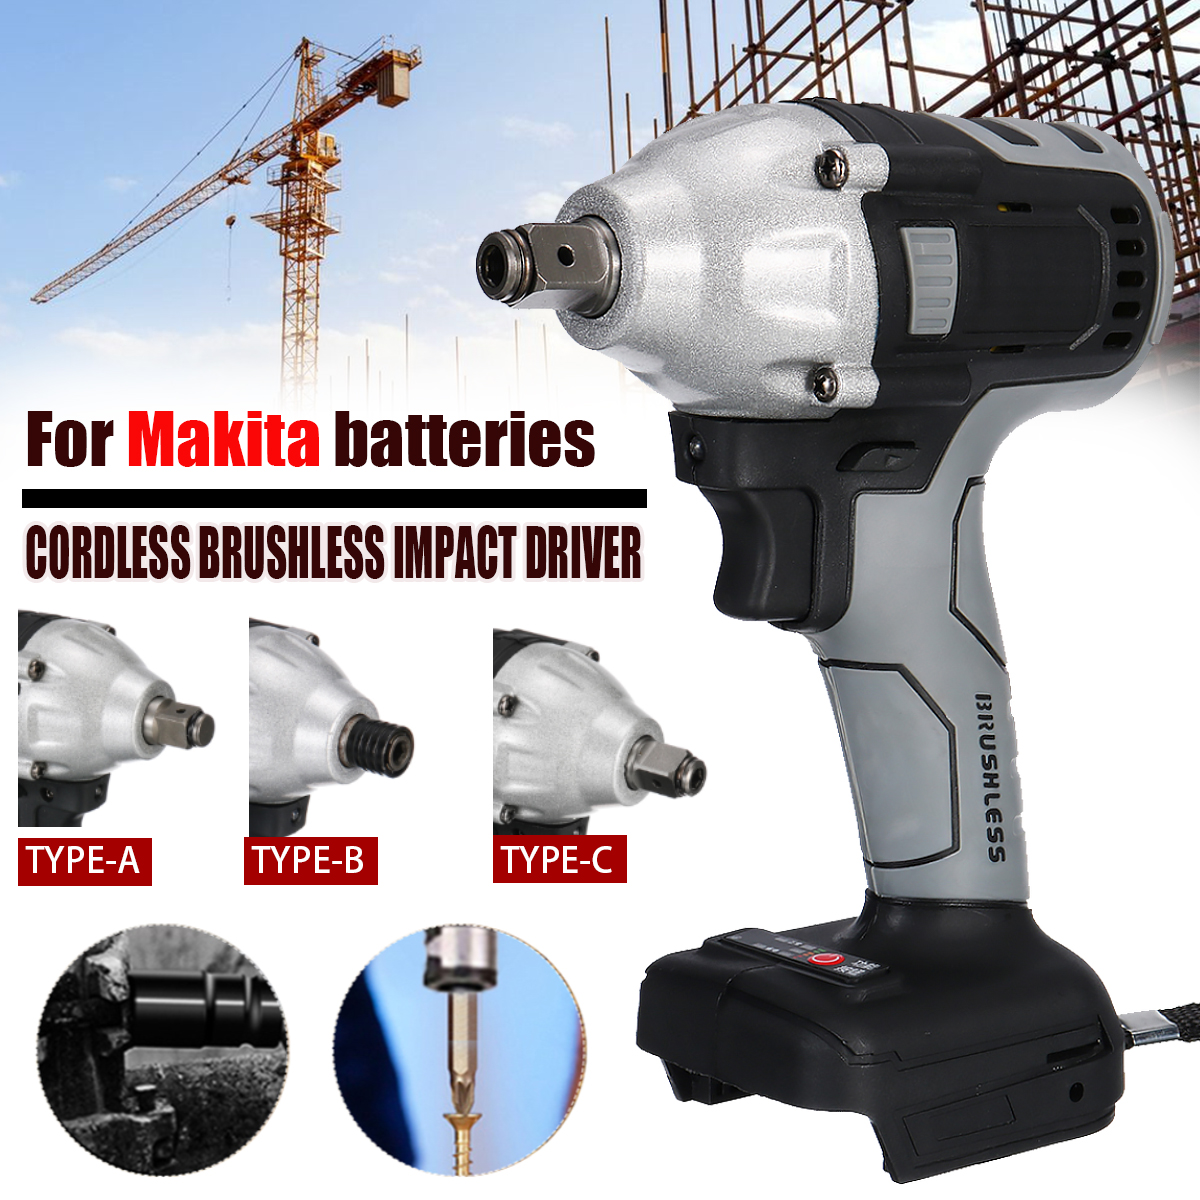 Gray-Cordless-Brushless-Impact-Wrench-Drill-Drive-Machine-For-Makita-18V-Battery-1769332-2